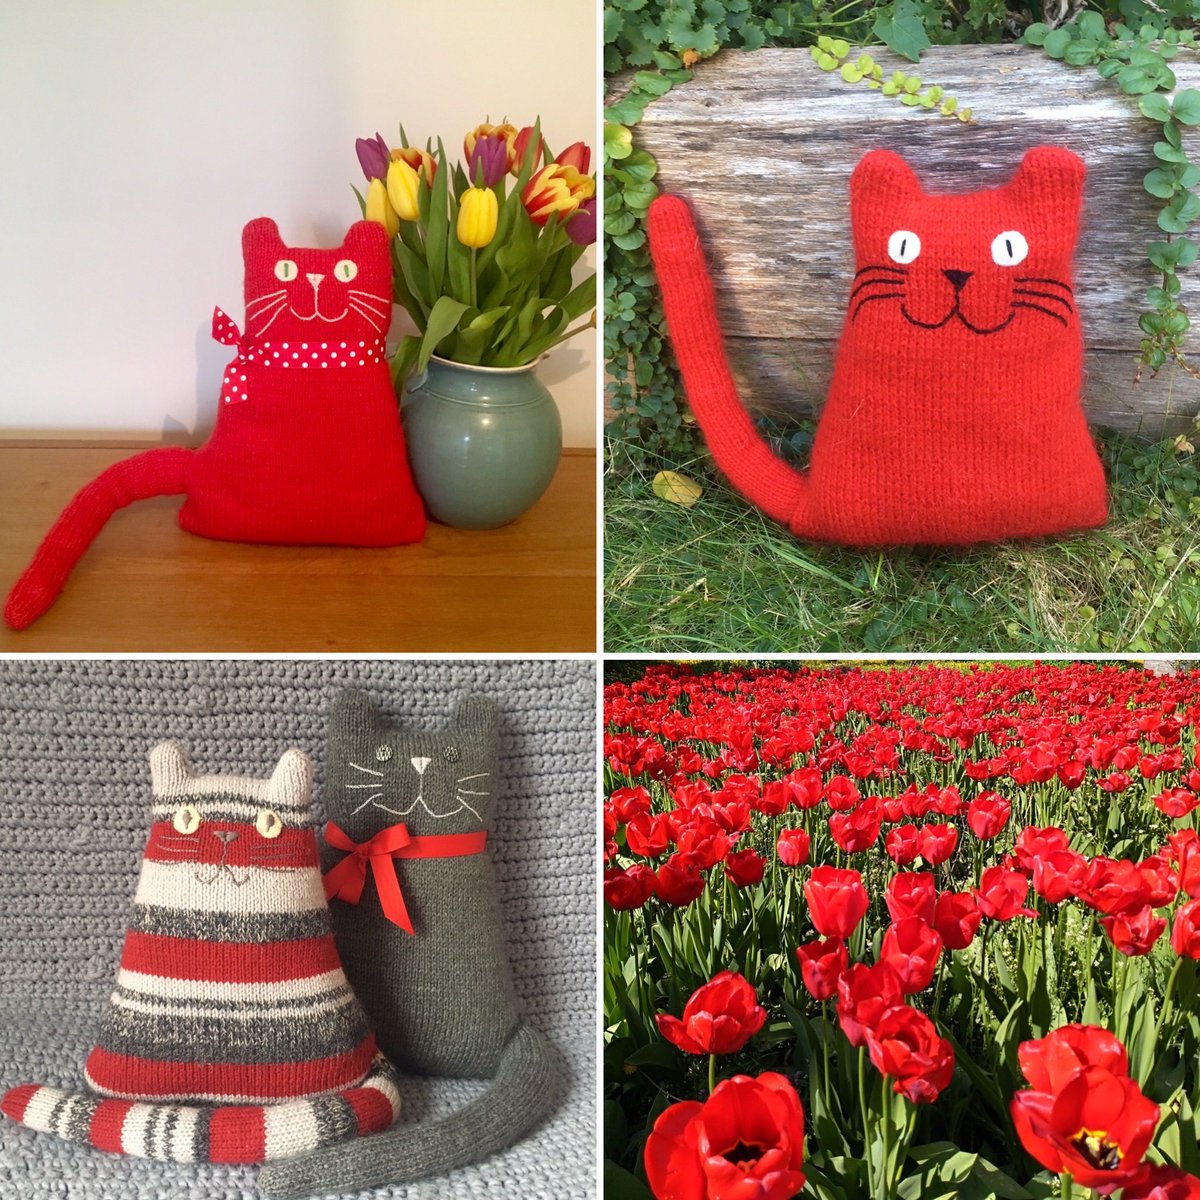 Red cats for today - check them out @threewoollyowls #etsyshop #earlybiz #ukgifthour #cats #giftideaas #catlover